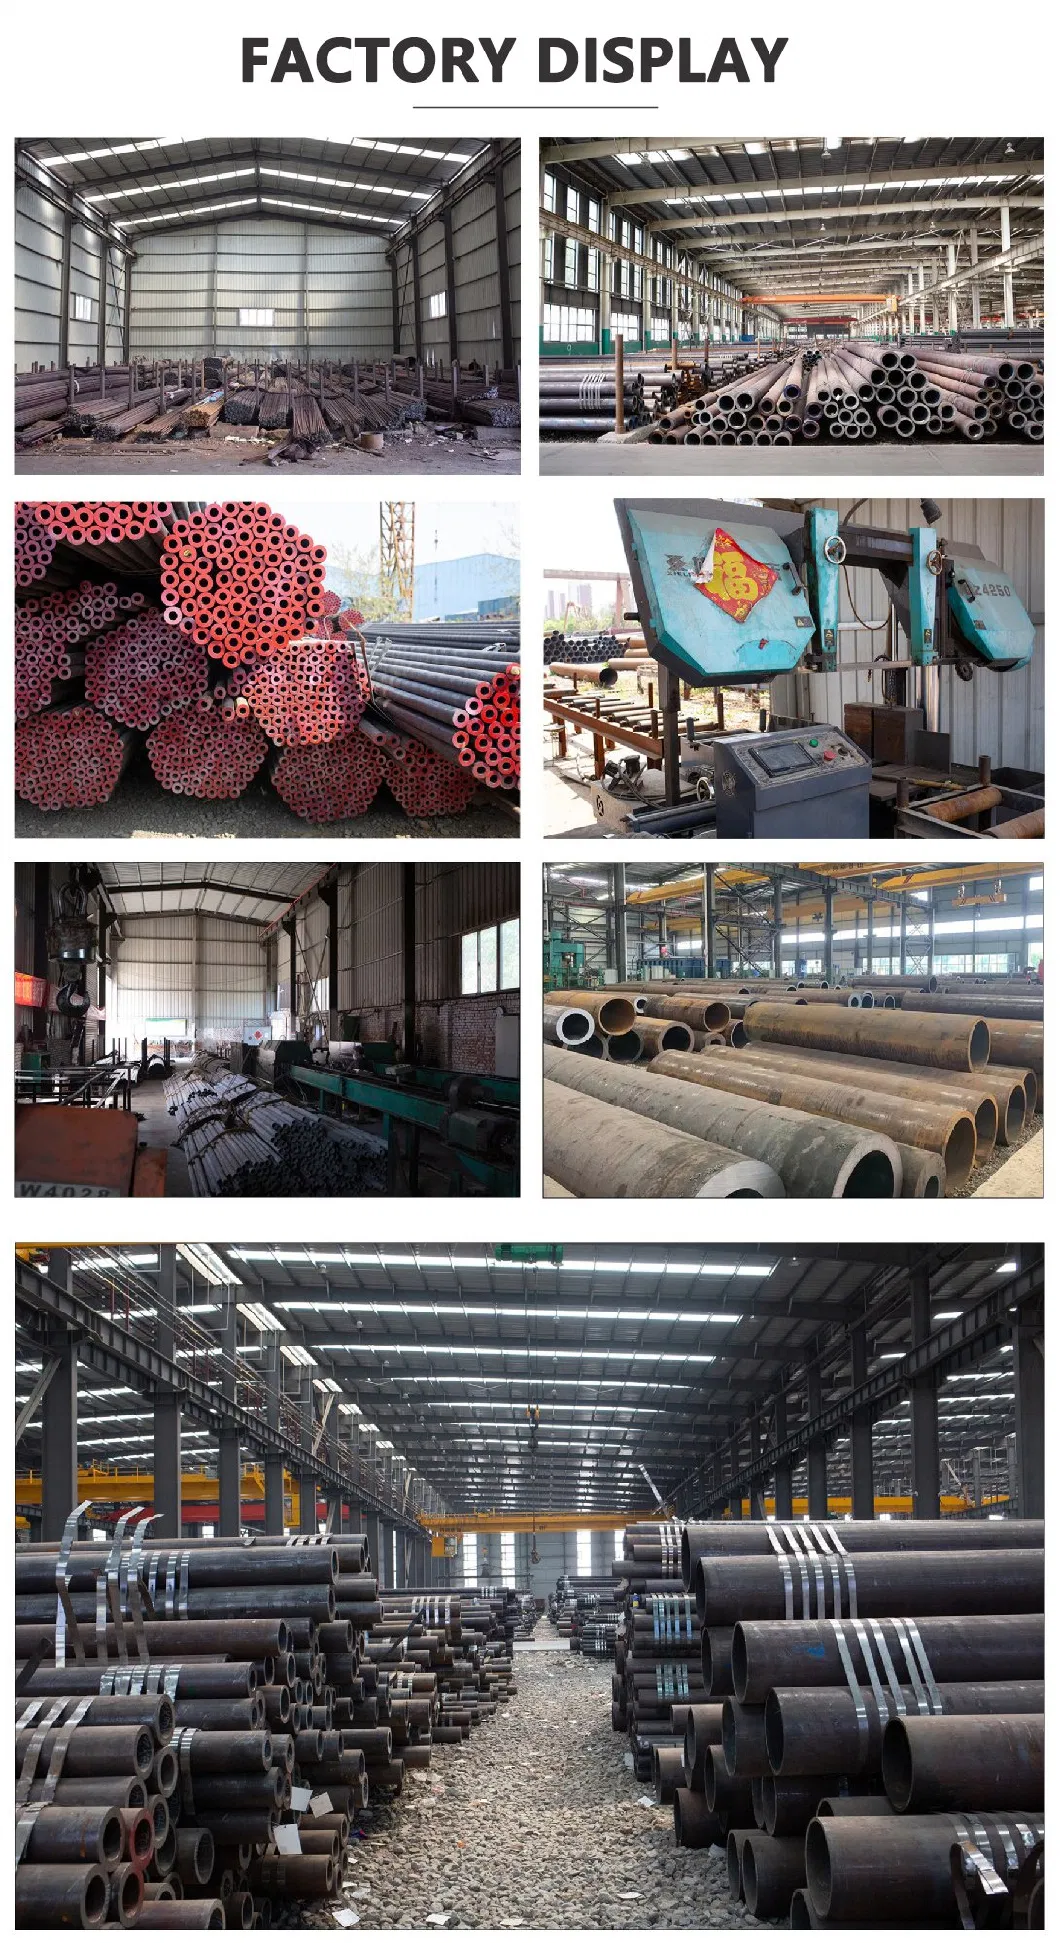 Seamless Carbon Steel Round Tube Ss330 SPHC Steel Seamless Round Pipe